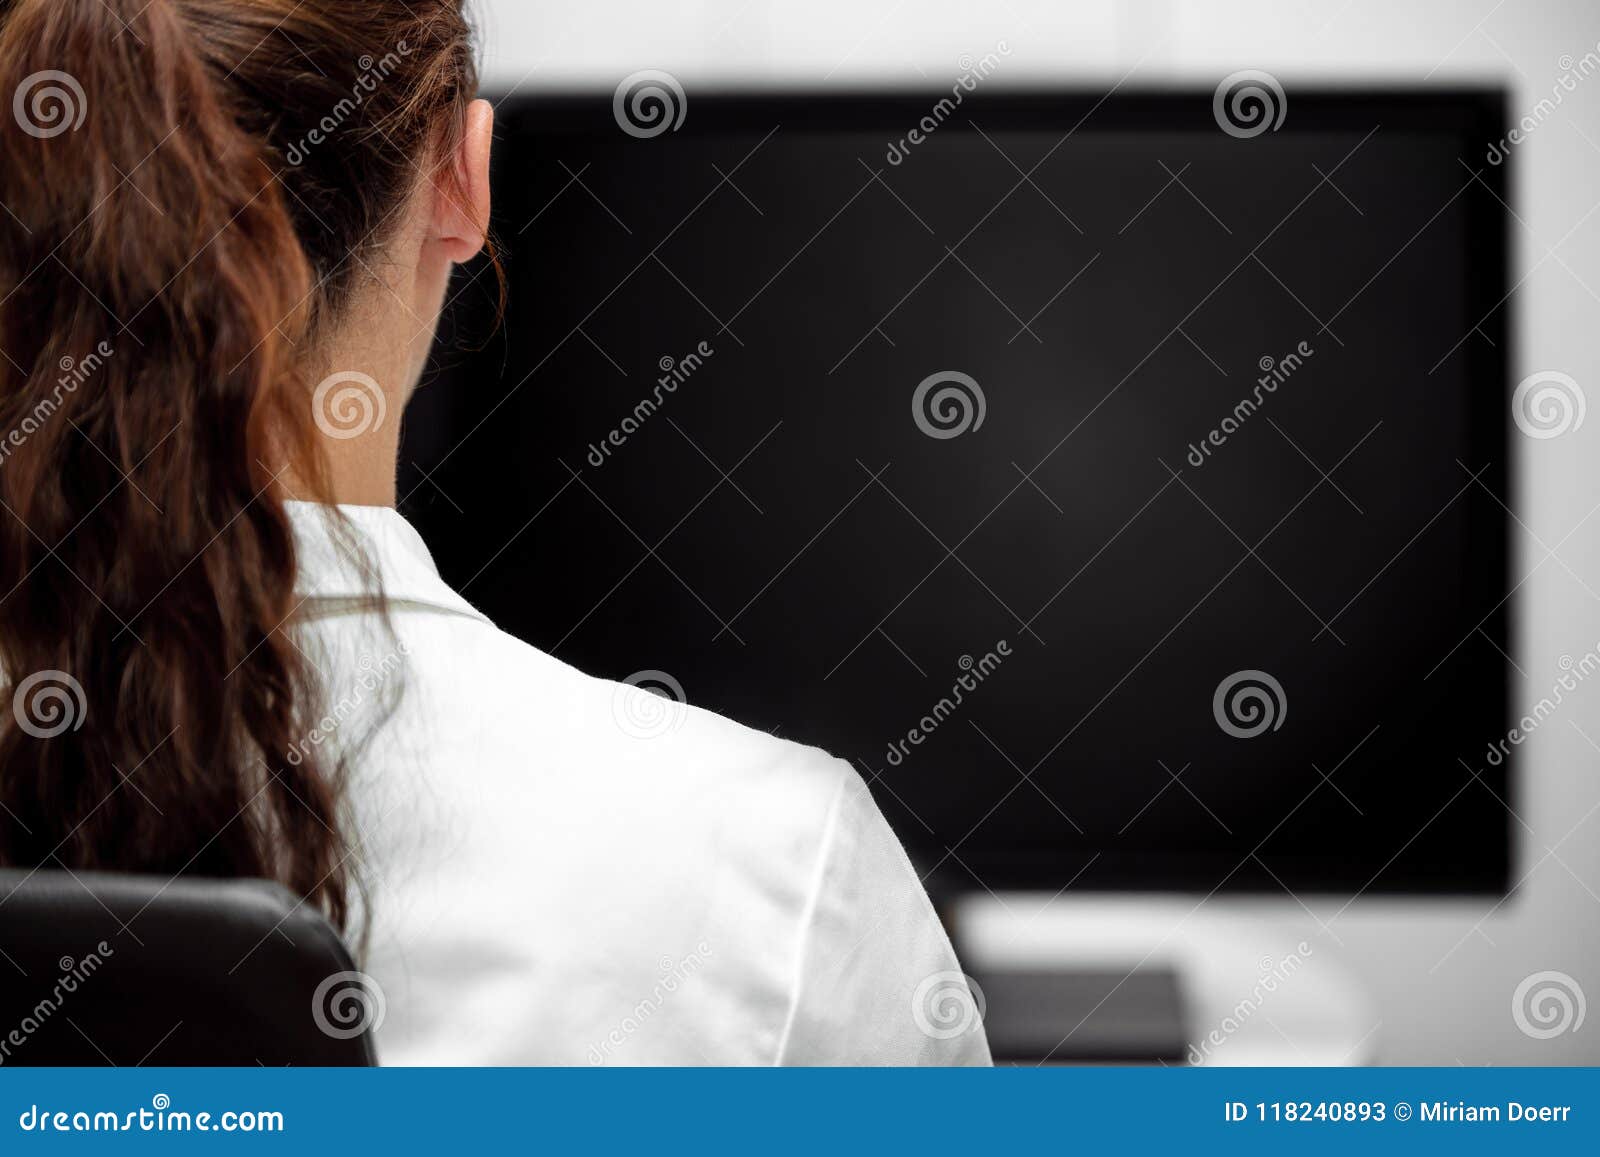 backview, young lab assistent or female doctor looking at a black desk or monitor